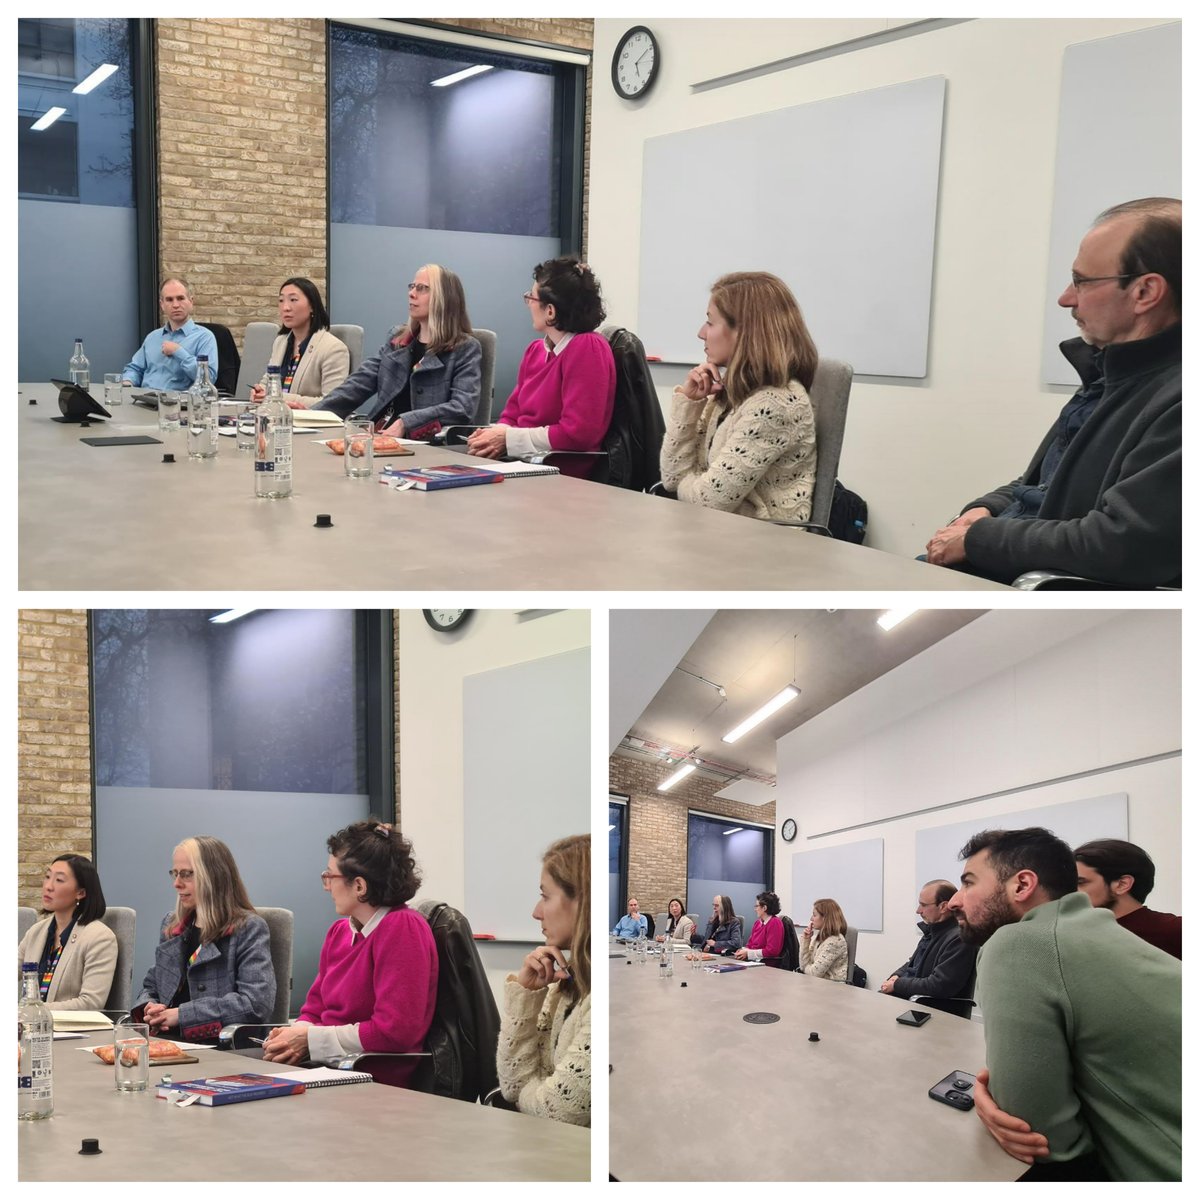 📚We were thrilled to host the launch of such a timely&noteworthy book as Not What The Bus Promised: Health Governance after #Brexit @hartpublishing by @TamaraHervey @AntovaIvanka @MarkFlear & M.Wood! Thanks to everyone who joined us! Order a copy here🔗bloomsbury.com/uk/not-what-th…